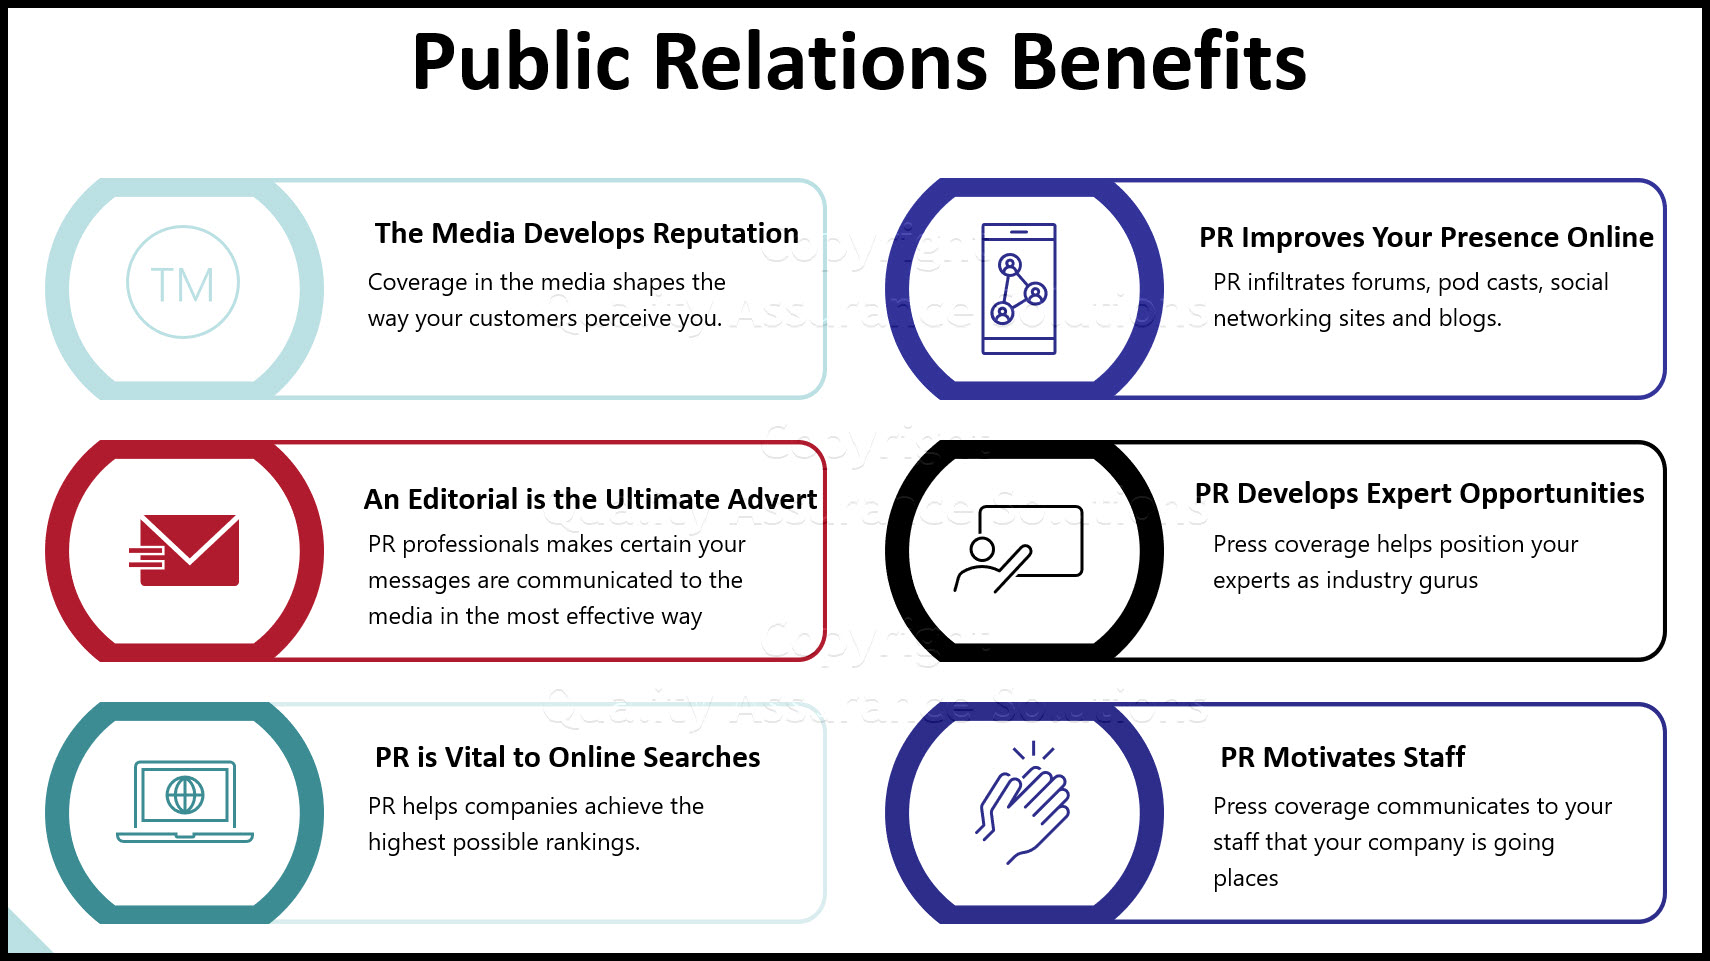 We reveal the blueprint public relations. Discover the 8 benefits to PR.